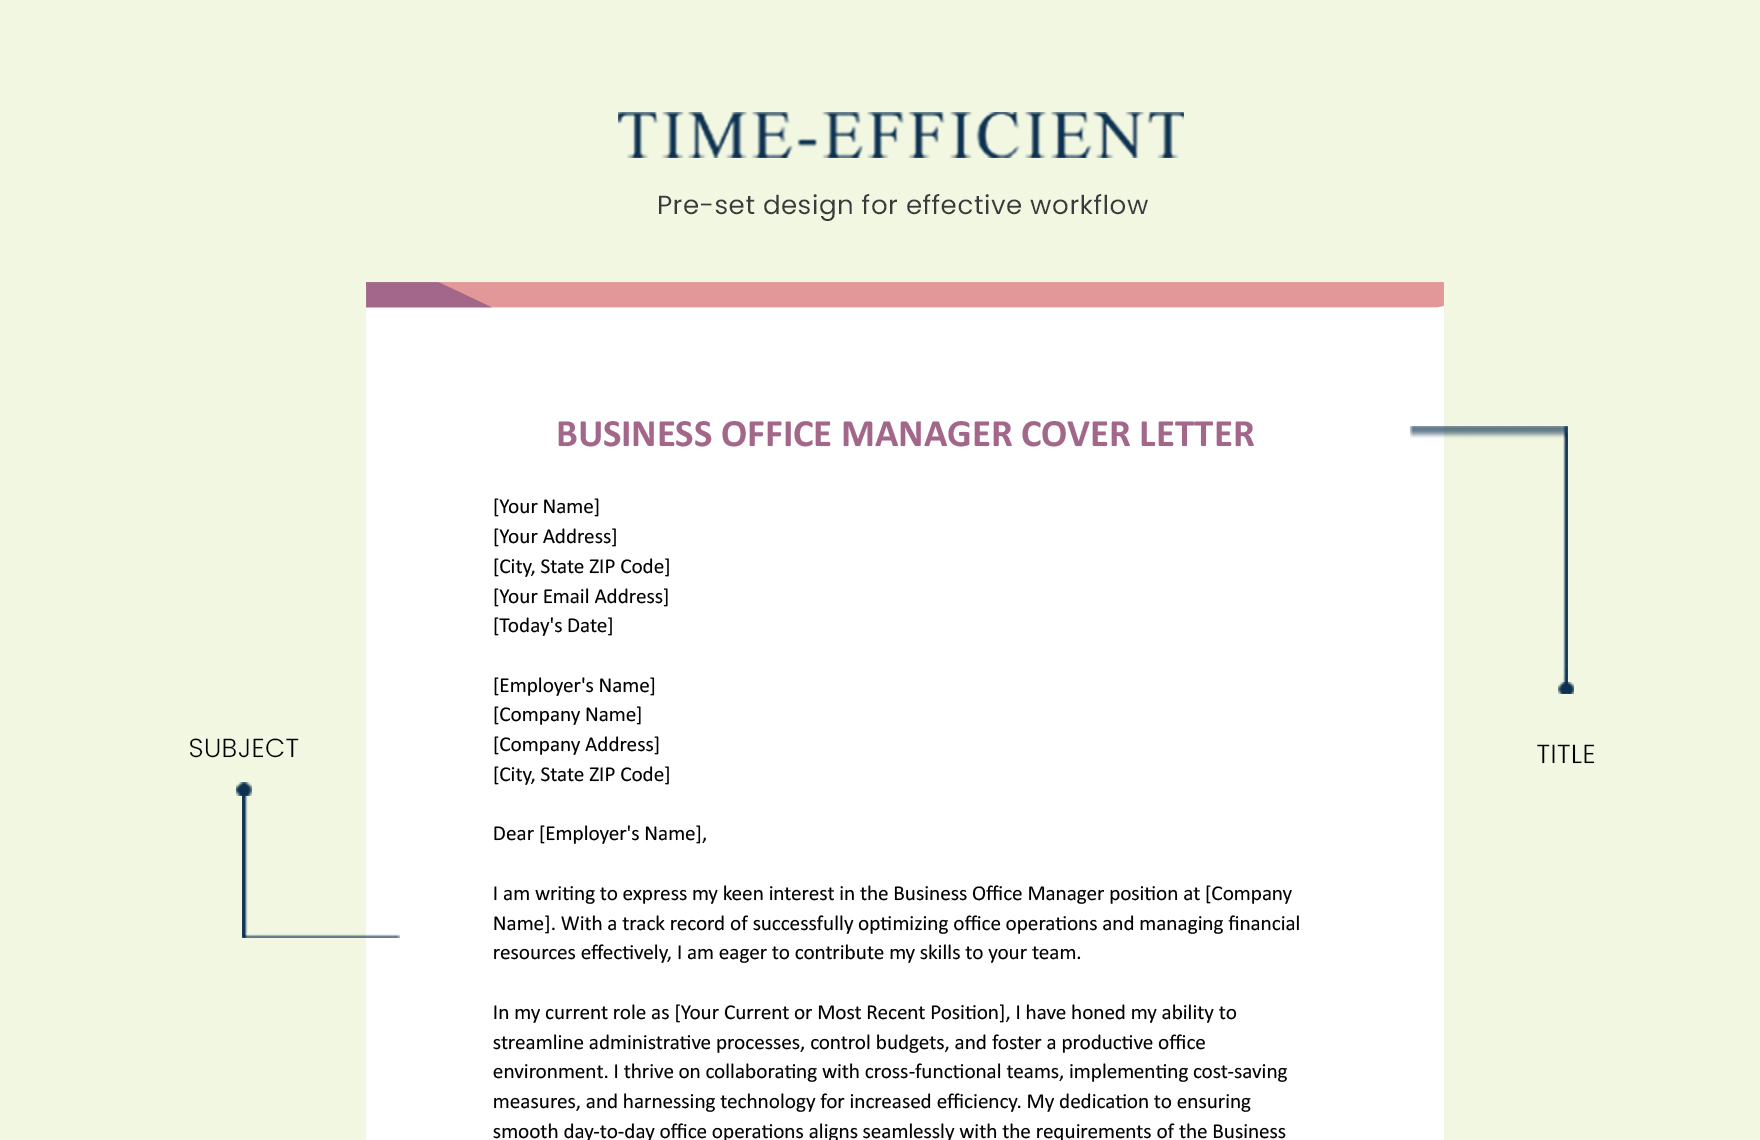 Business Office Manager Cover Letter